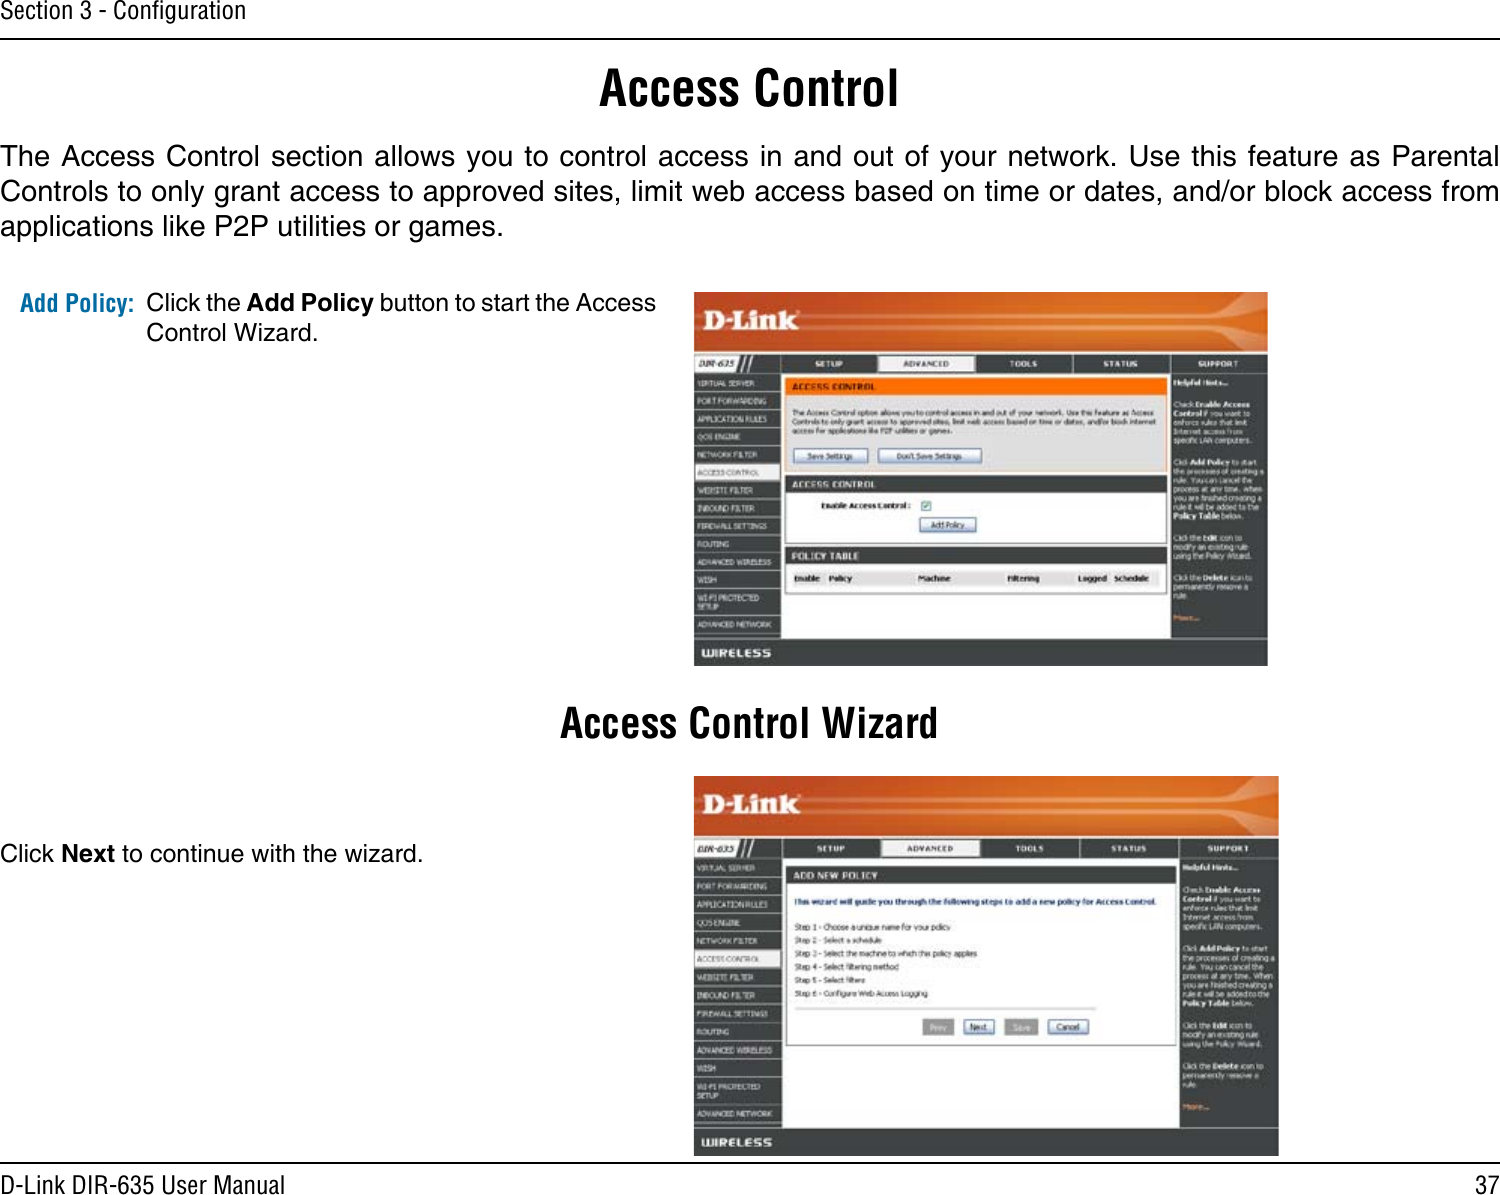 37D-Link DIR-635 User ManualSection 3 - ConﬁgurationAccess ControlClick the Add Policy button to start the Access Control Wizard. Add Policy:The Access Control section allows you to control access in and out of your network. Use this feature as Parental Controls to only grant access to approved sites, limit web access based on time or dates, and/or block access from applications like P2P utilities or games.Click Next to continue with the wizard.Access Control Wizard